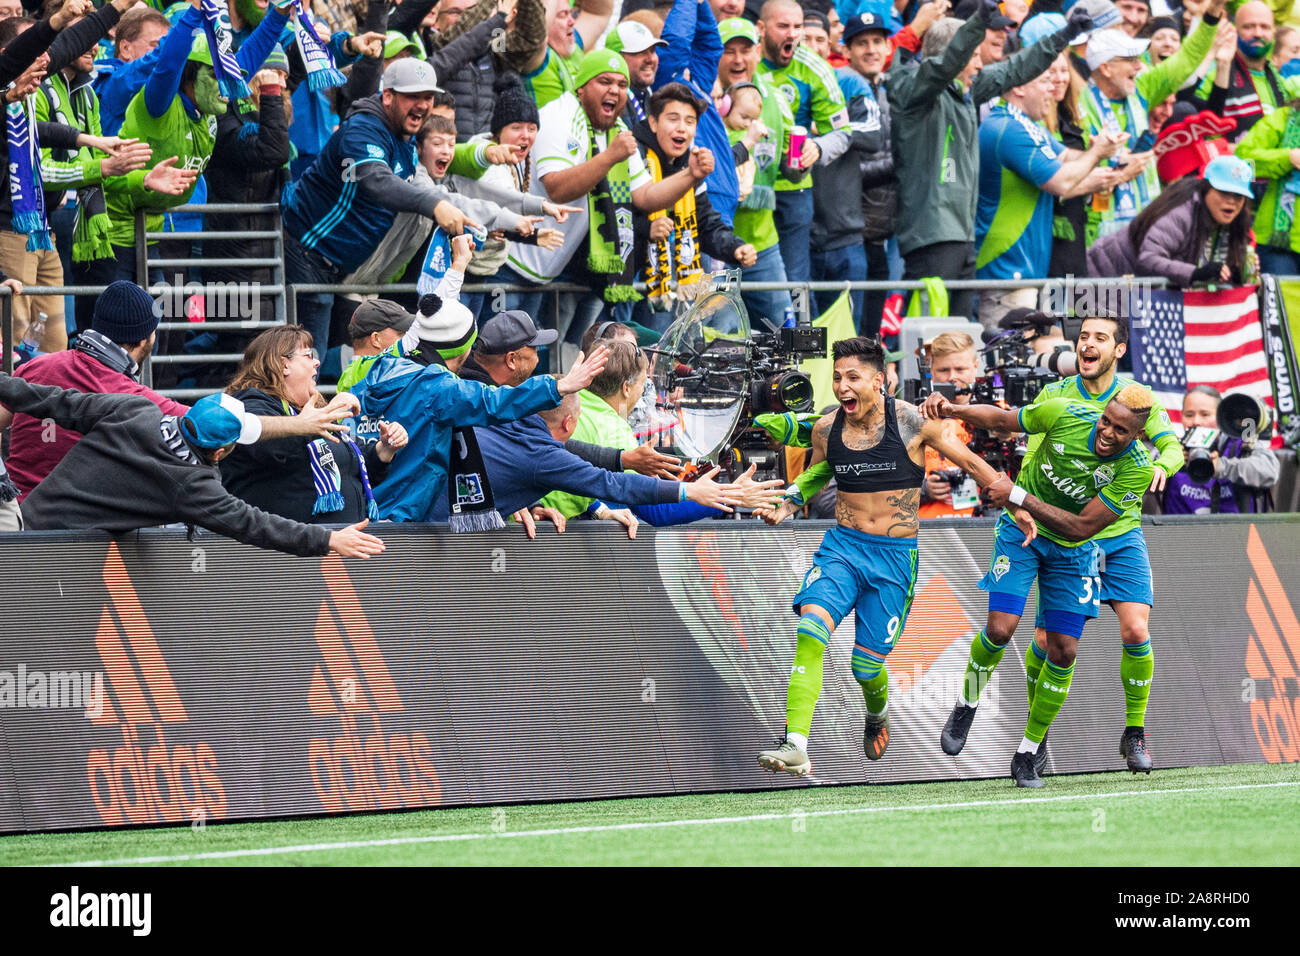 Seattle Sounders forward Raul Ruidiaz (9) after a goal during the MLS Cup Championship game between the Seattle Sounders and Toronto FC at CenturyLink Field on Sunday November 10, 2019 in Seattle, WA. Jacob Kupferman/CSM Stock Photo